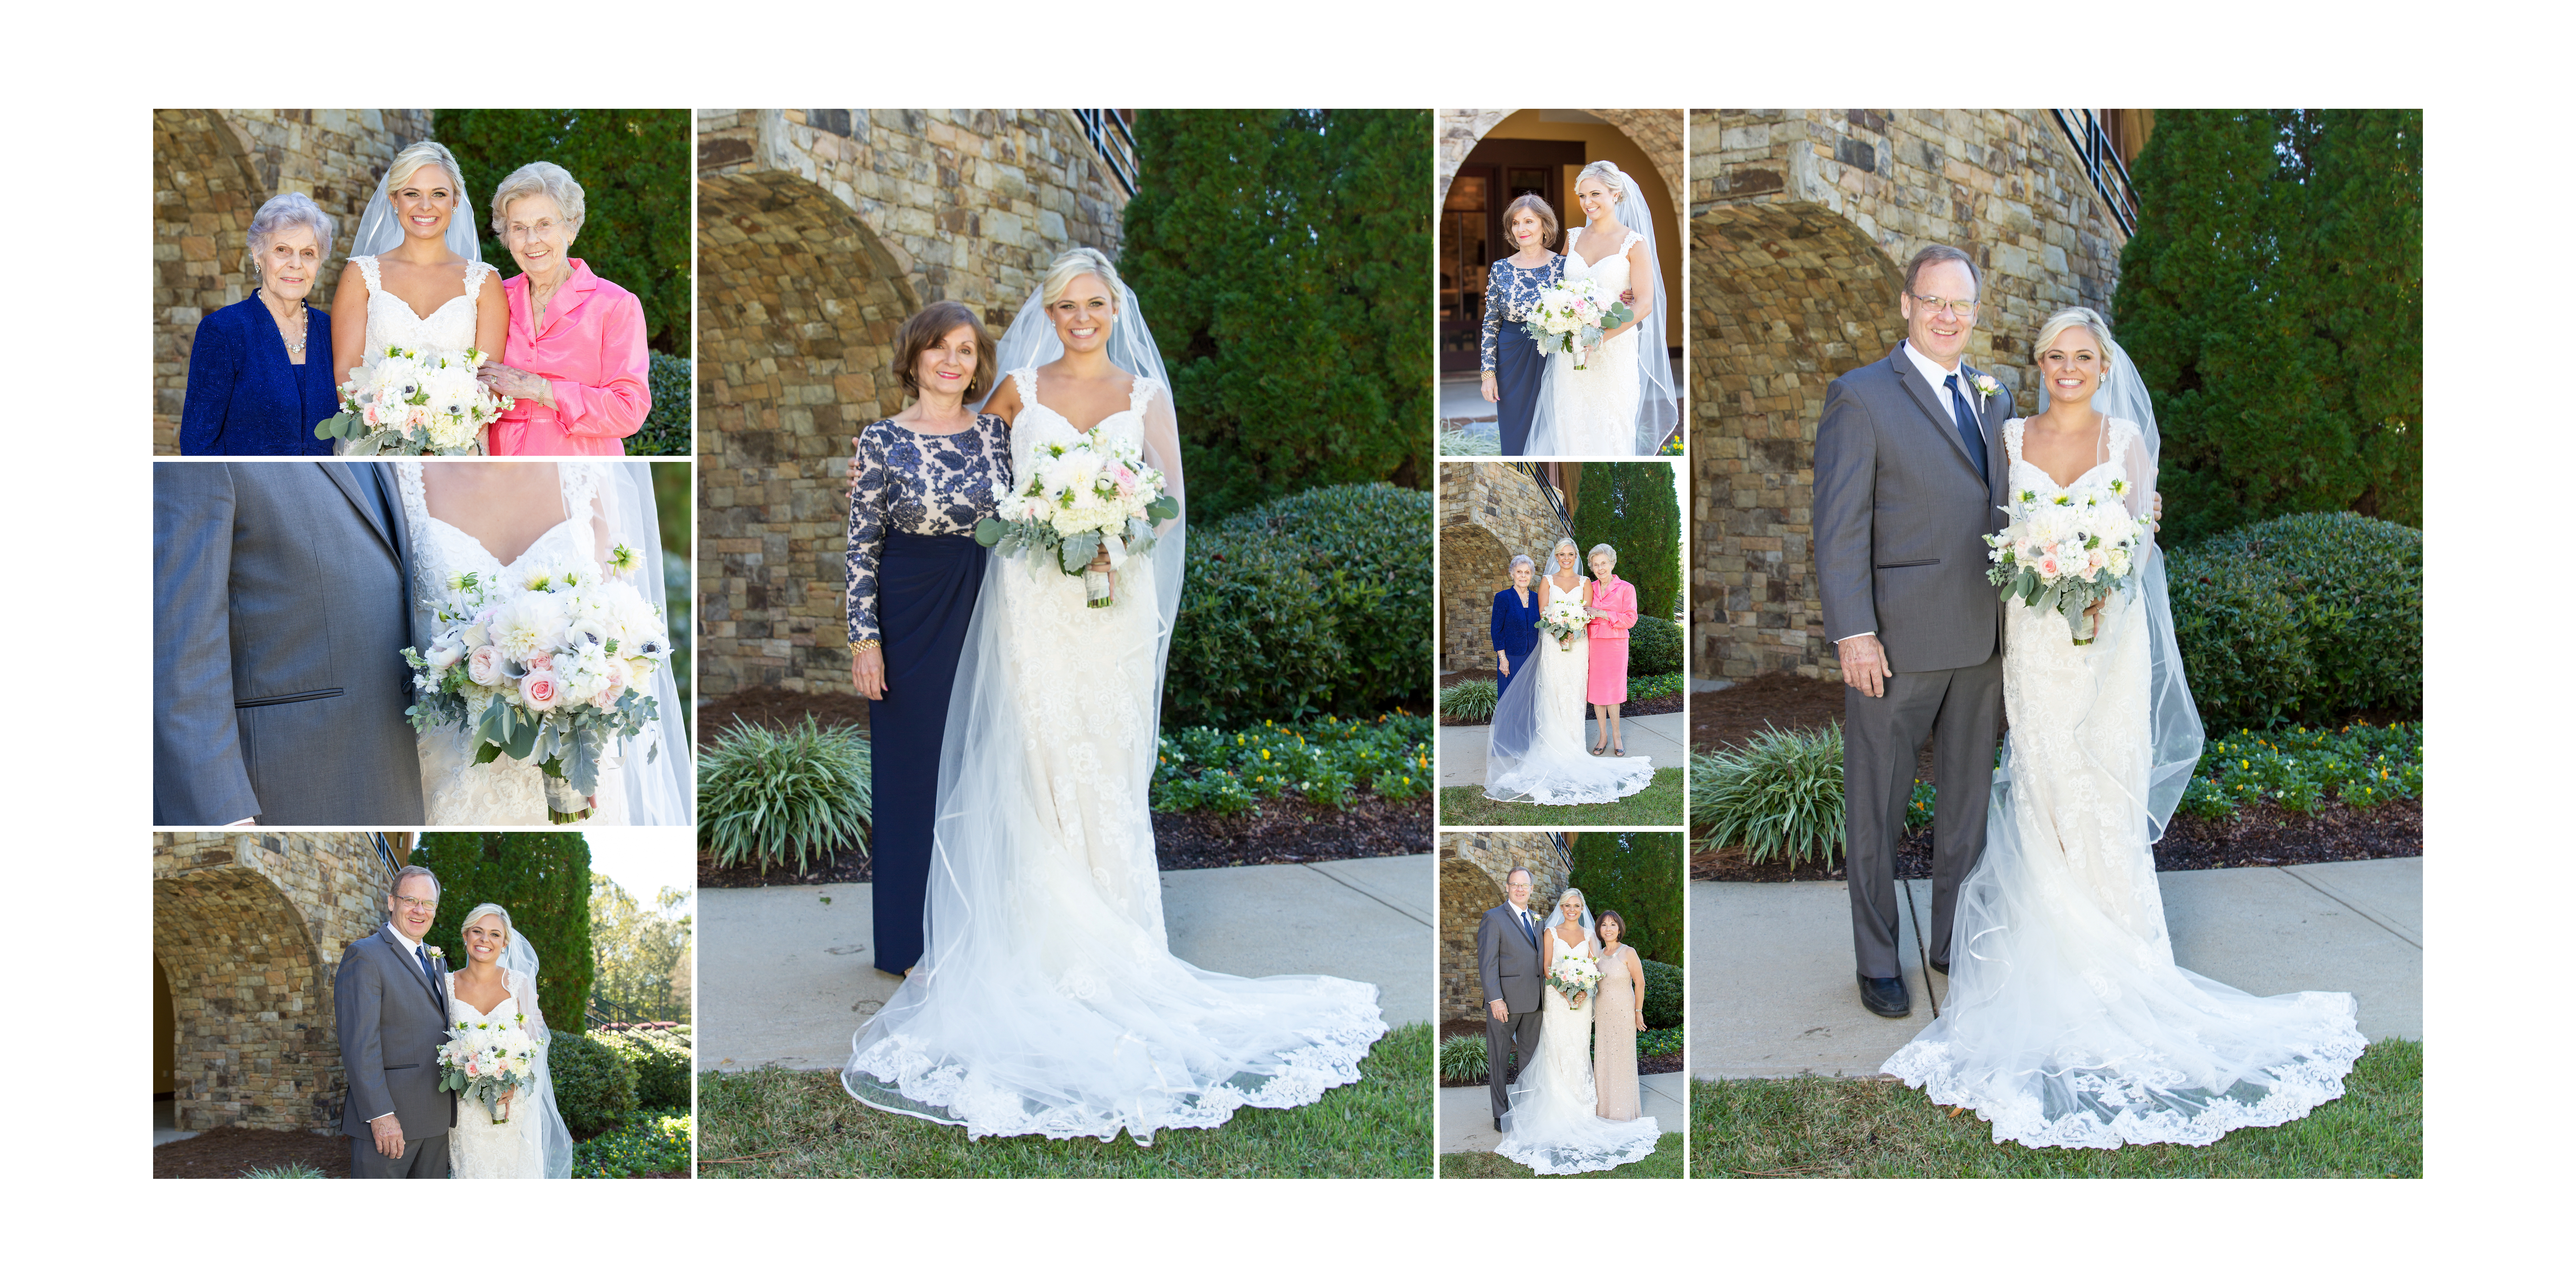 Firethorne Country Club wedding charlotte NC. Whitford/Kessell wedding photography by Pixels On Paper Photographers photo